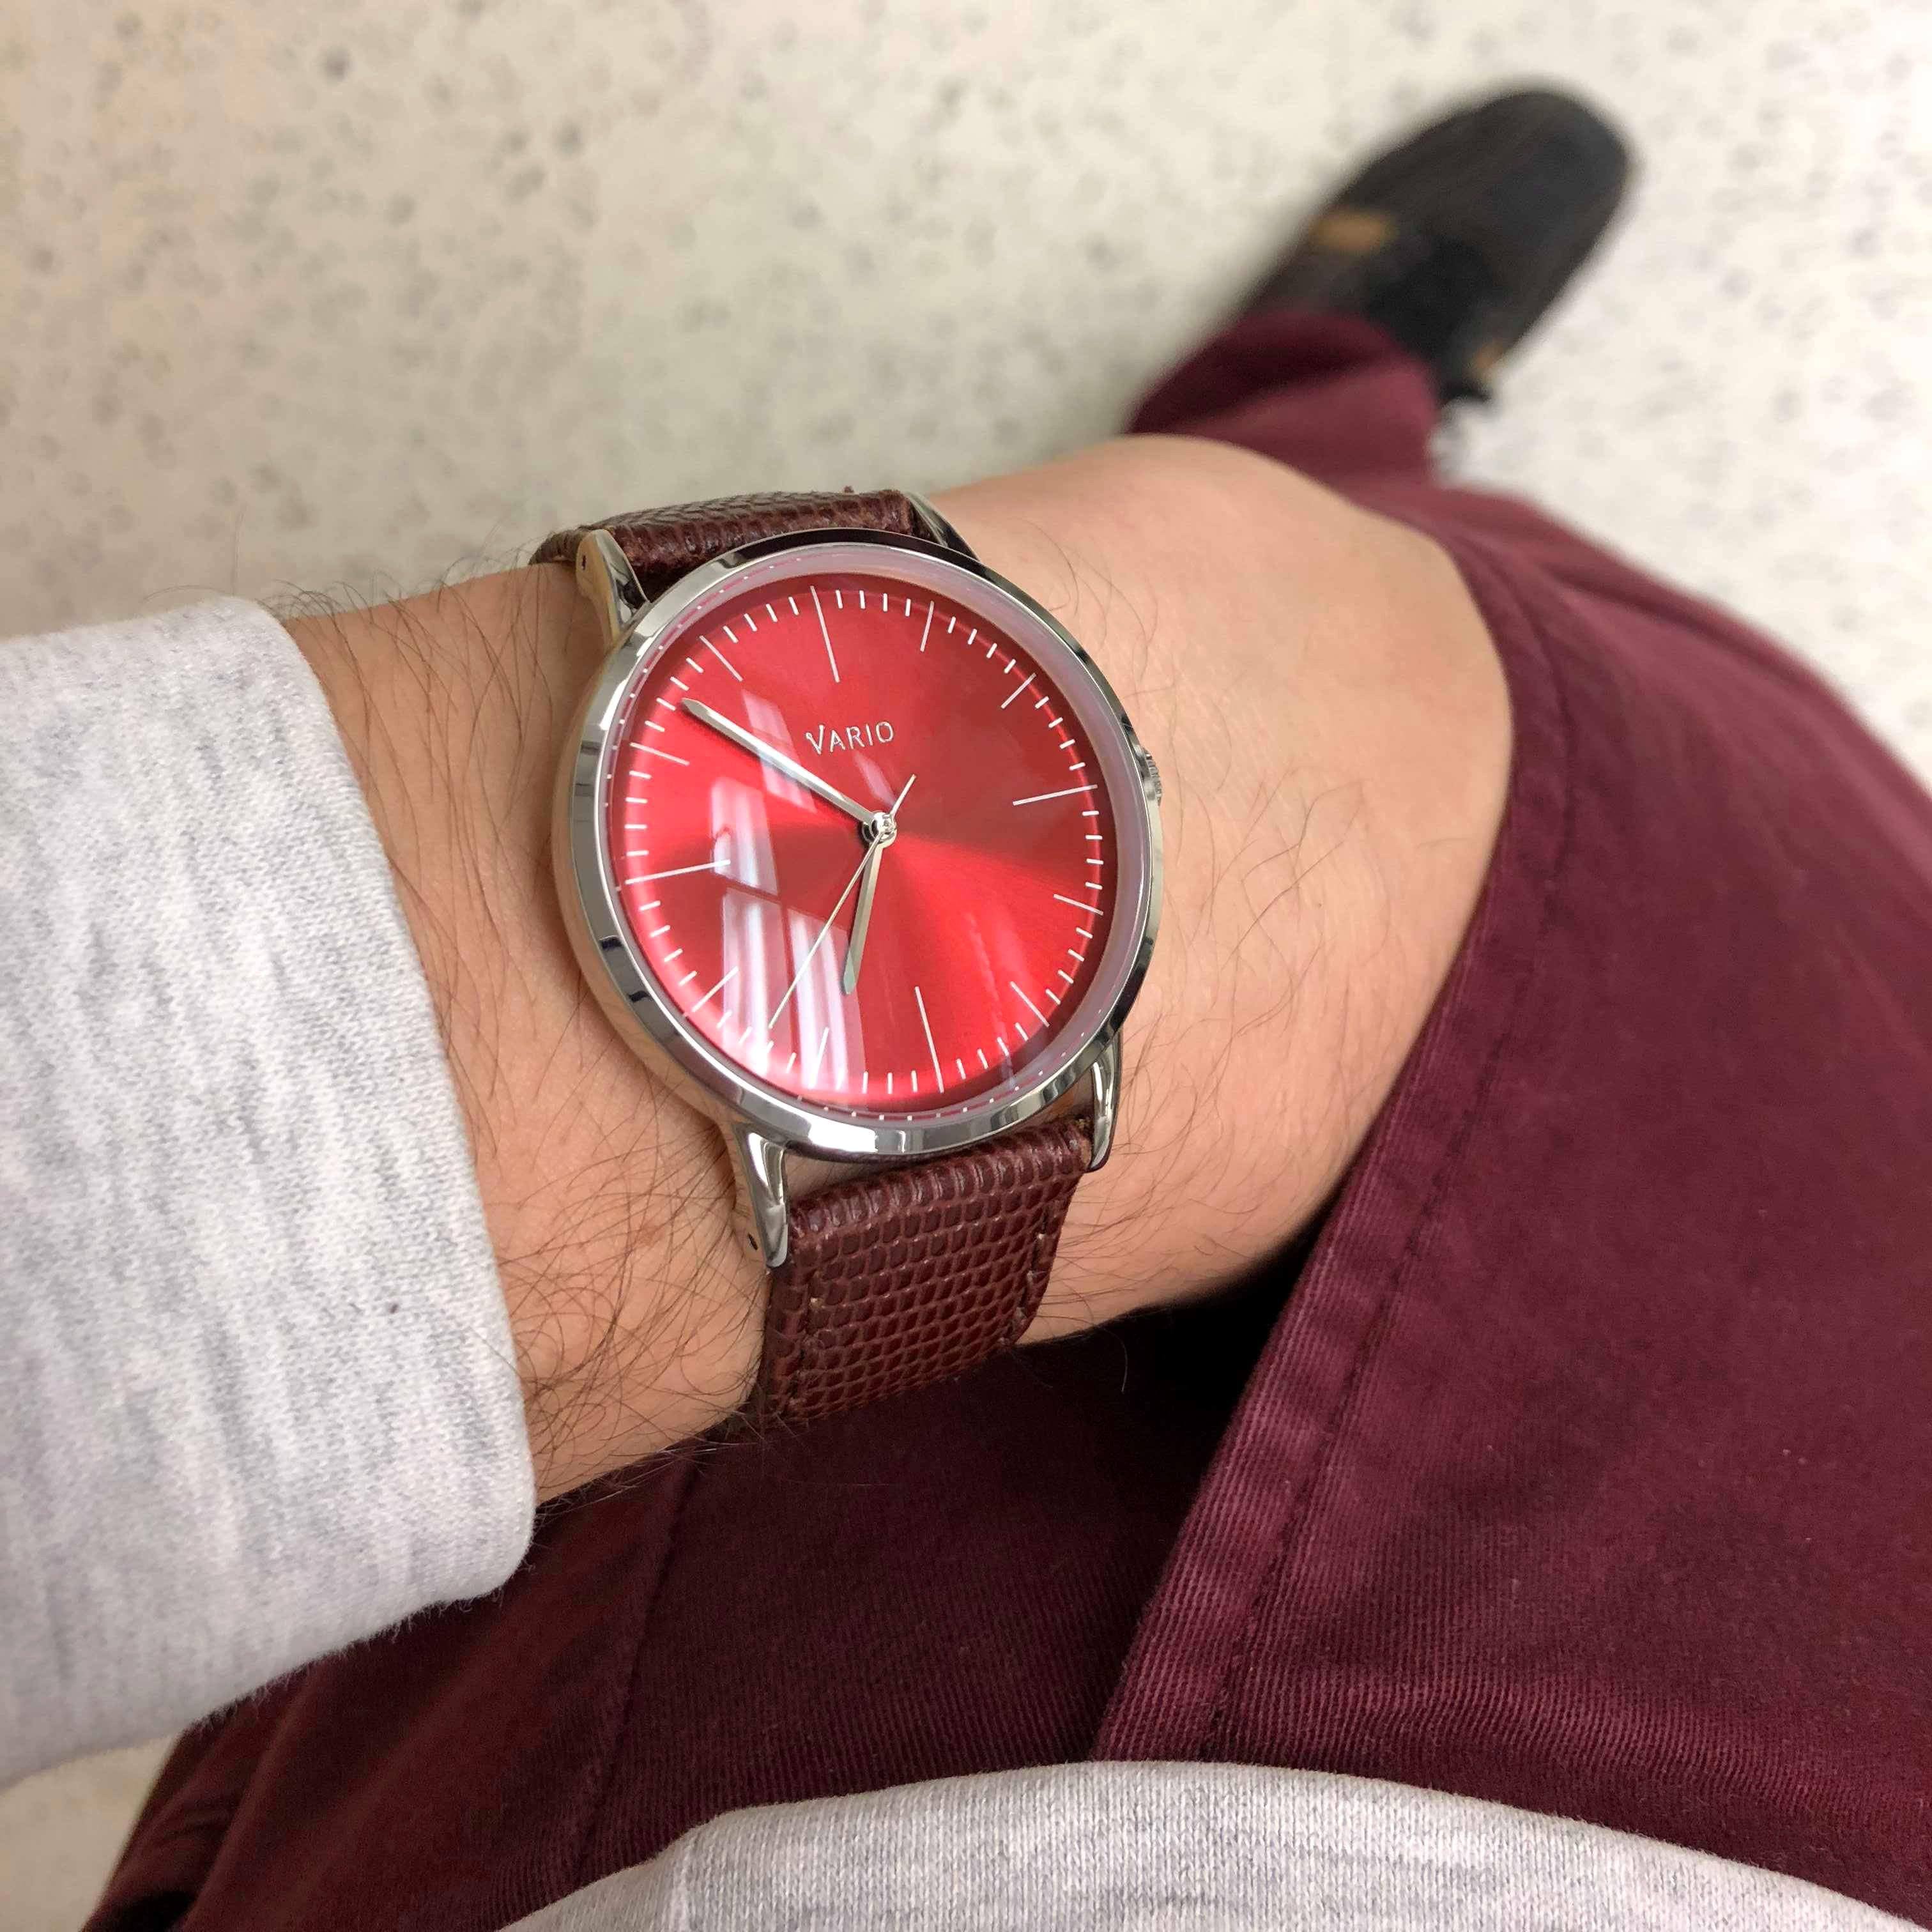 Is this Red Eclipse watch too loud? Photo by #varioeveryday member Alan